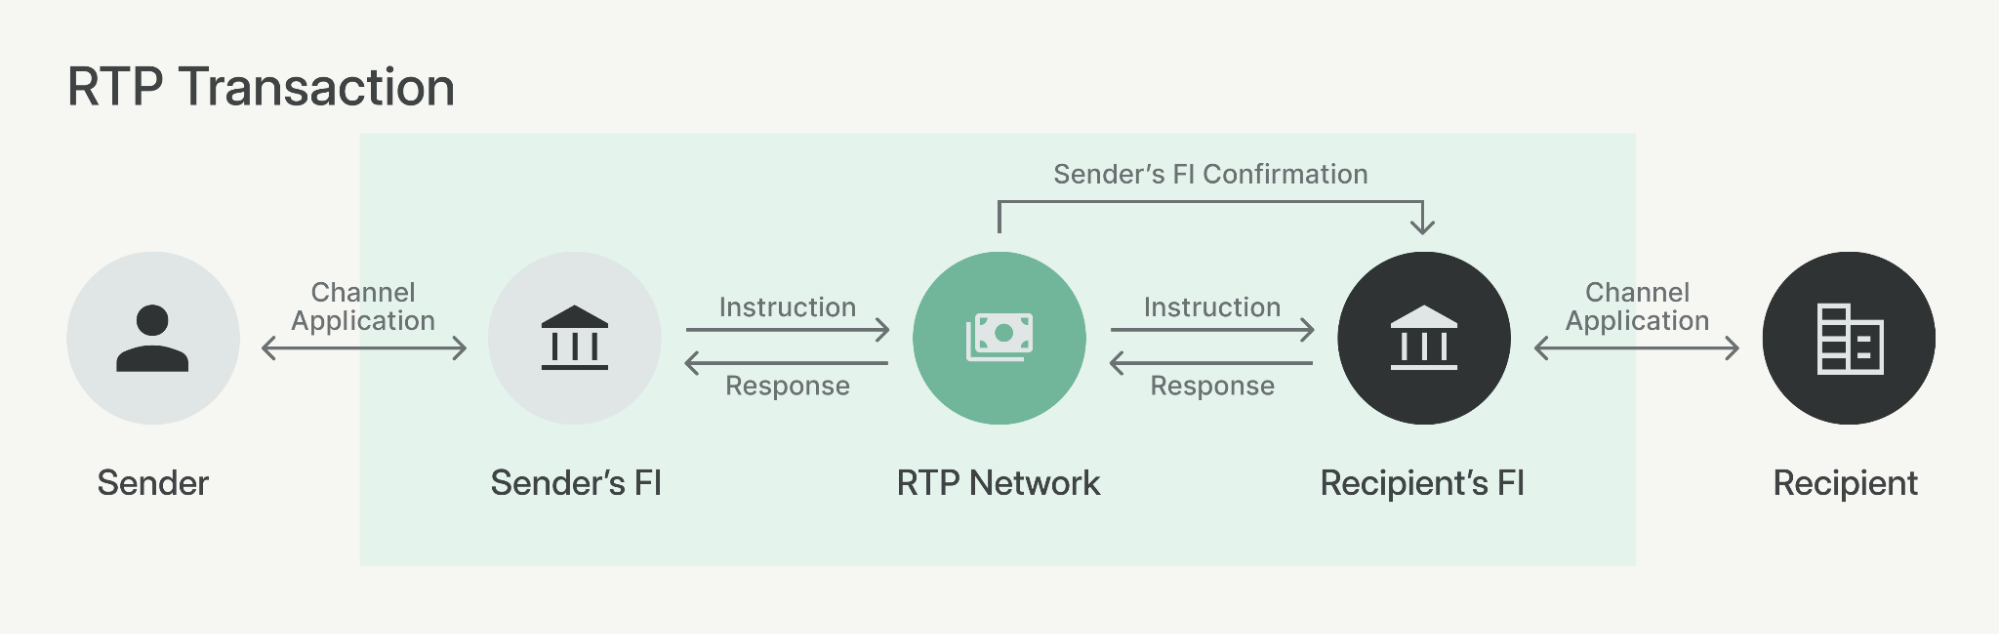 How messages flow during an RTP transaction